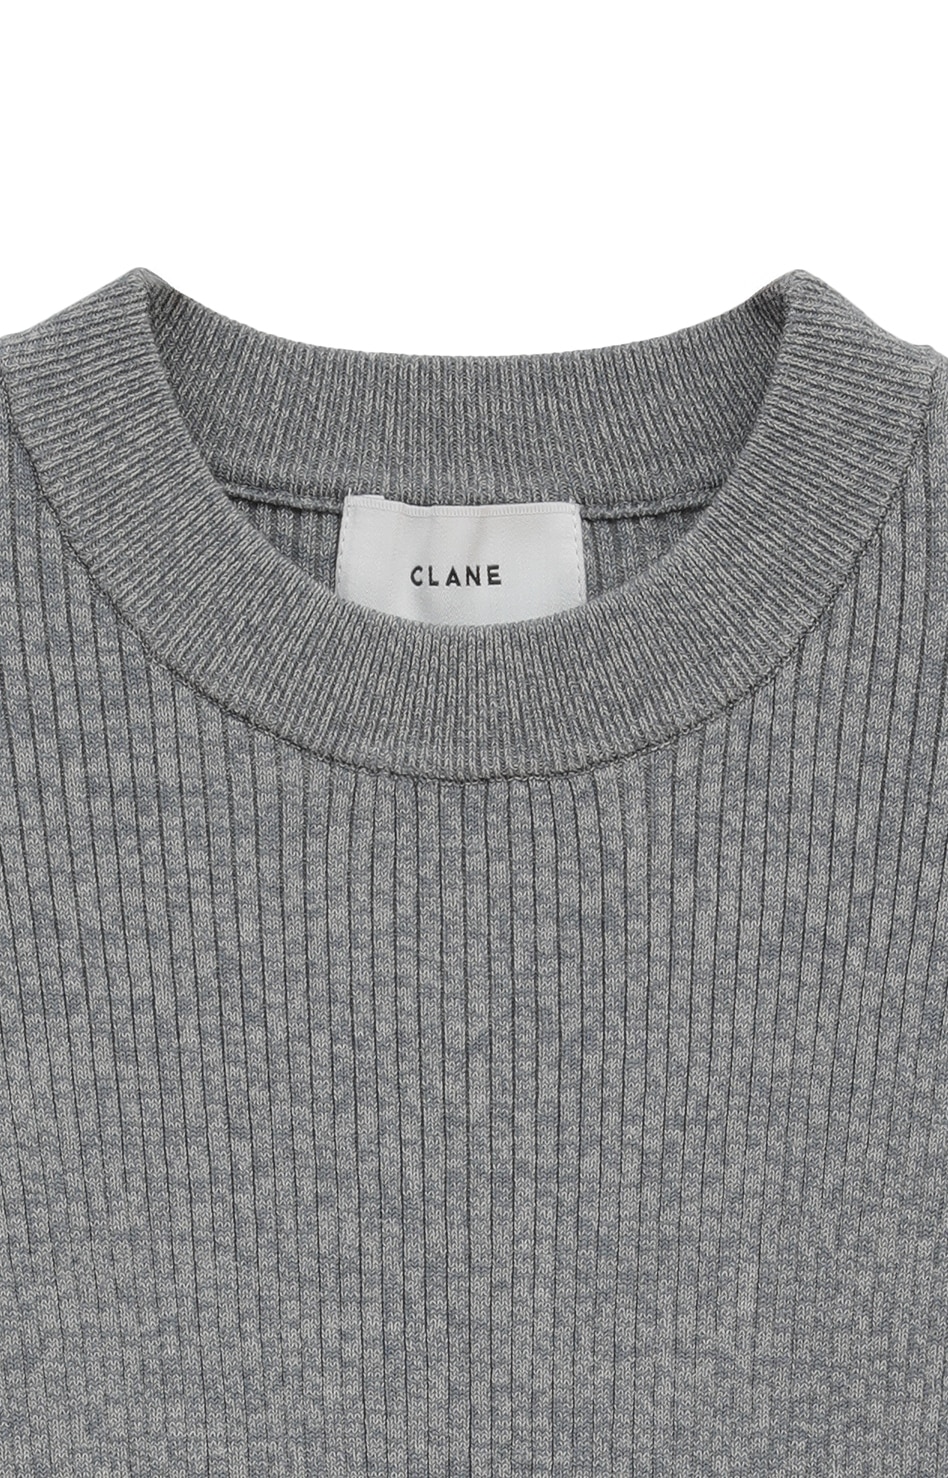 H/N HALF SLEEVE RIB KNIT TOPS｜TOPS(トップス)｜CLANE OFFICIAL ...